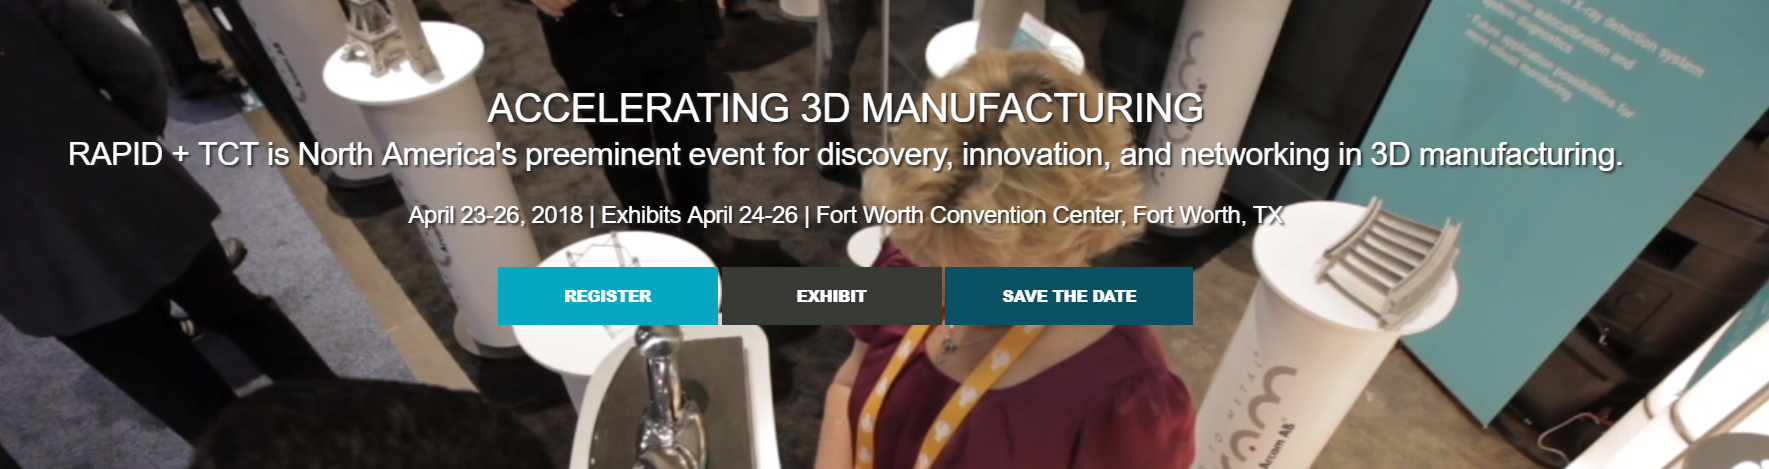 Accelerating 3D Manufacturing